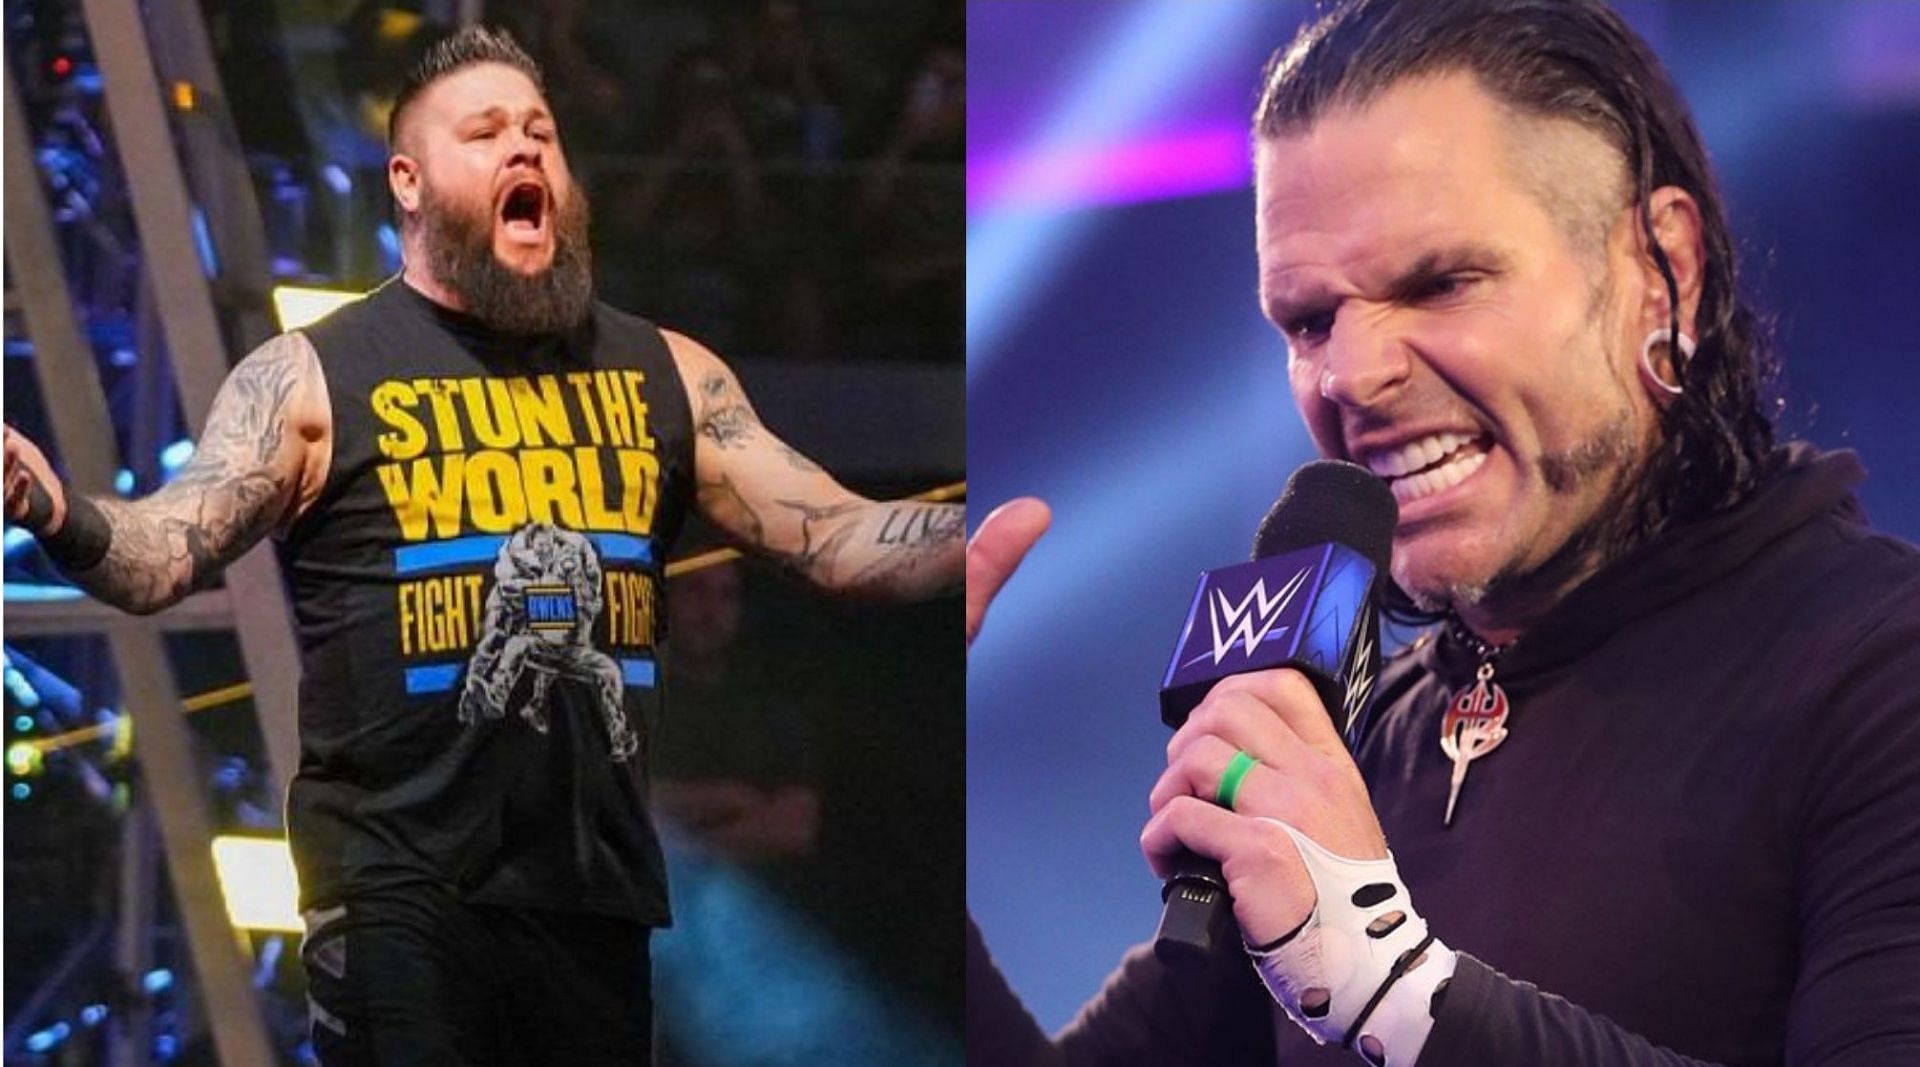 Kevin Owens and AEW star Jeff Hardy